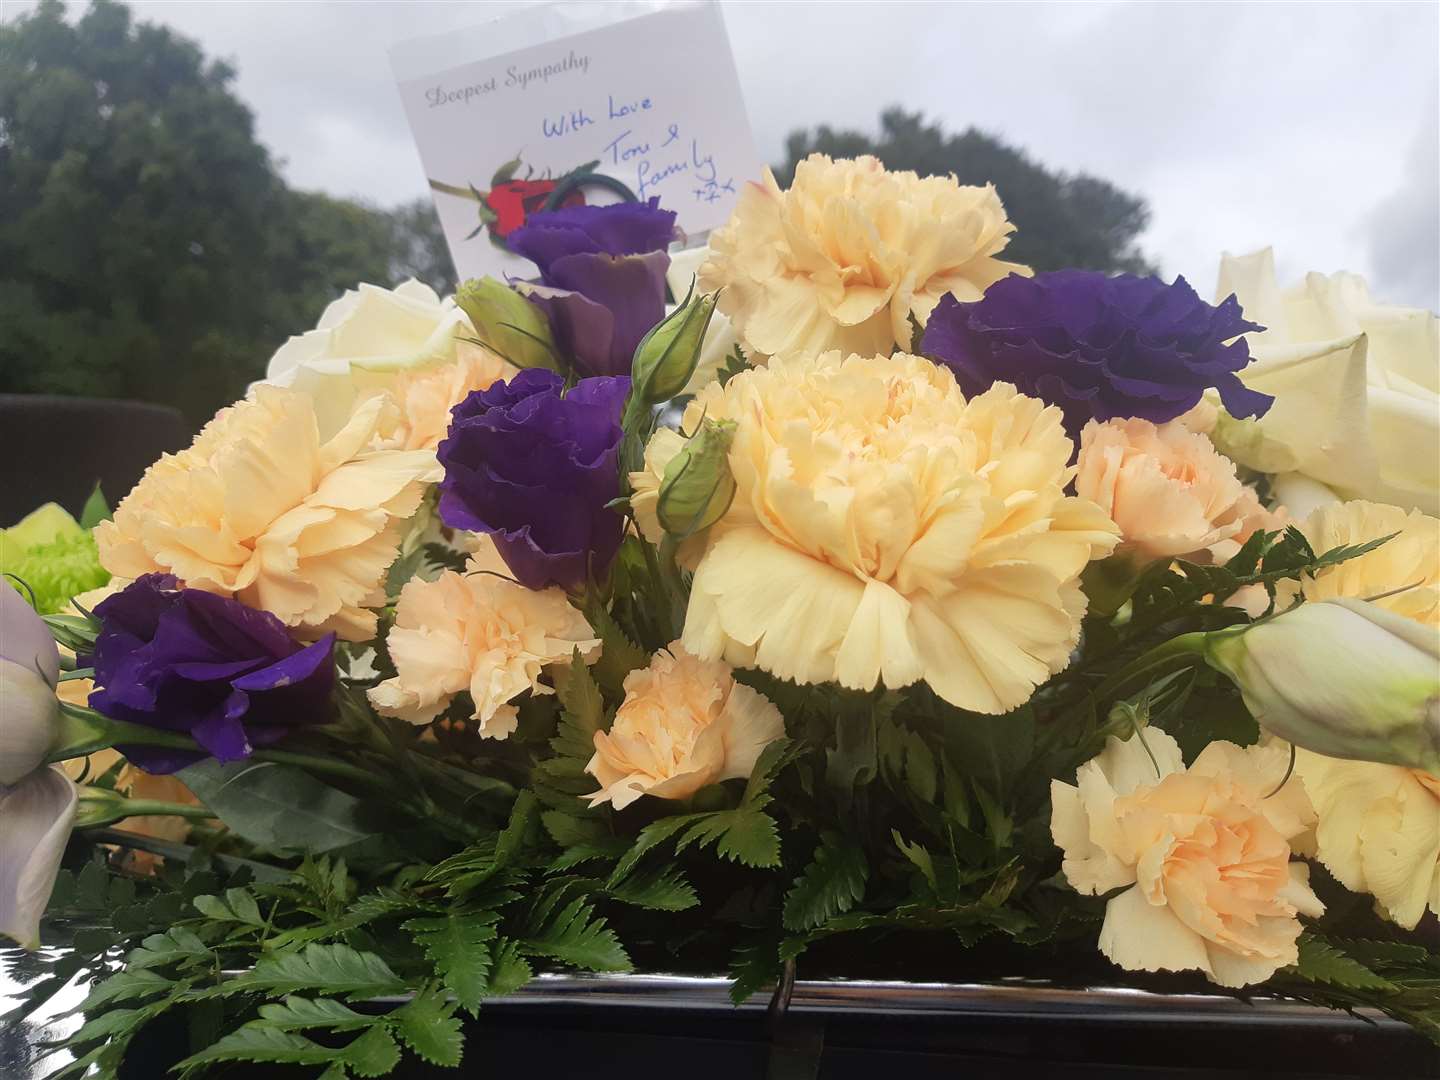 Flowers adorned the Land Rover with messages from friends and family